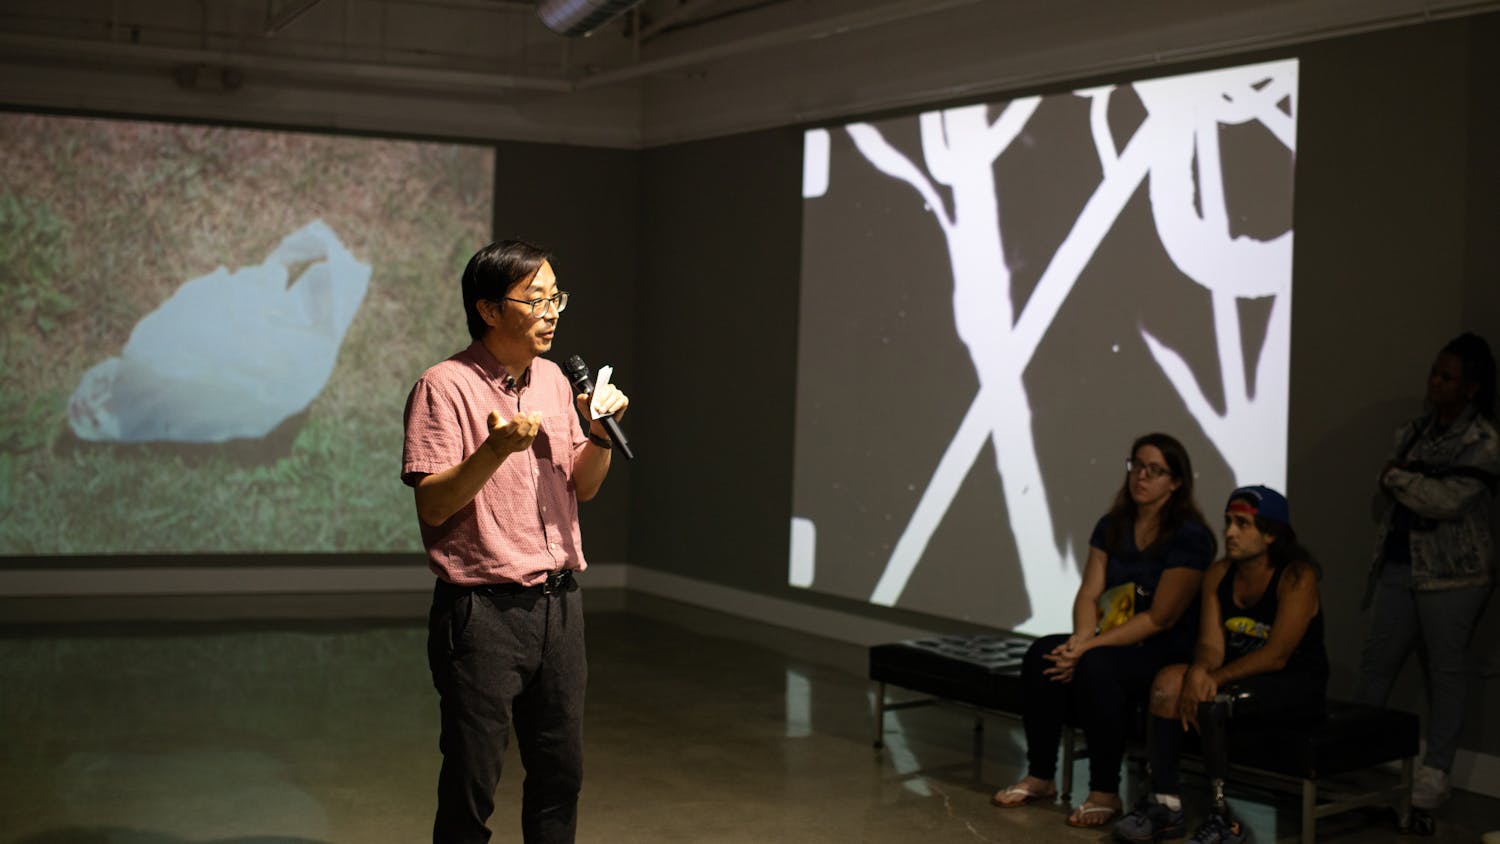 Media artist and UB faculty member Carl Lee discusses his newest project "Unity Island"